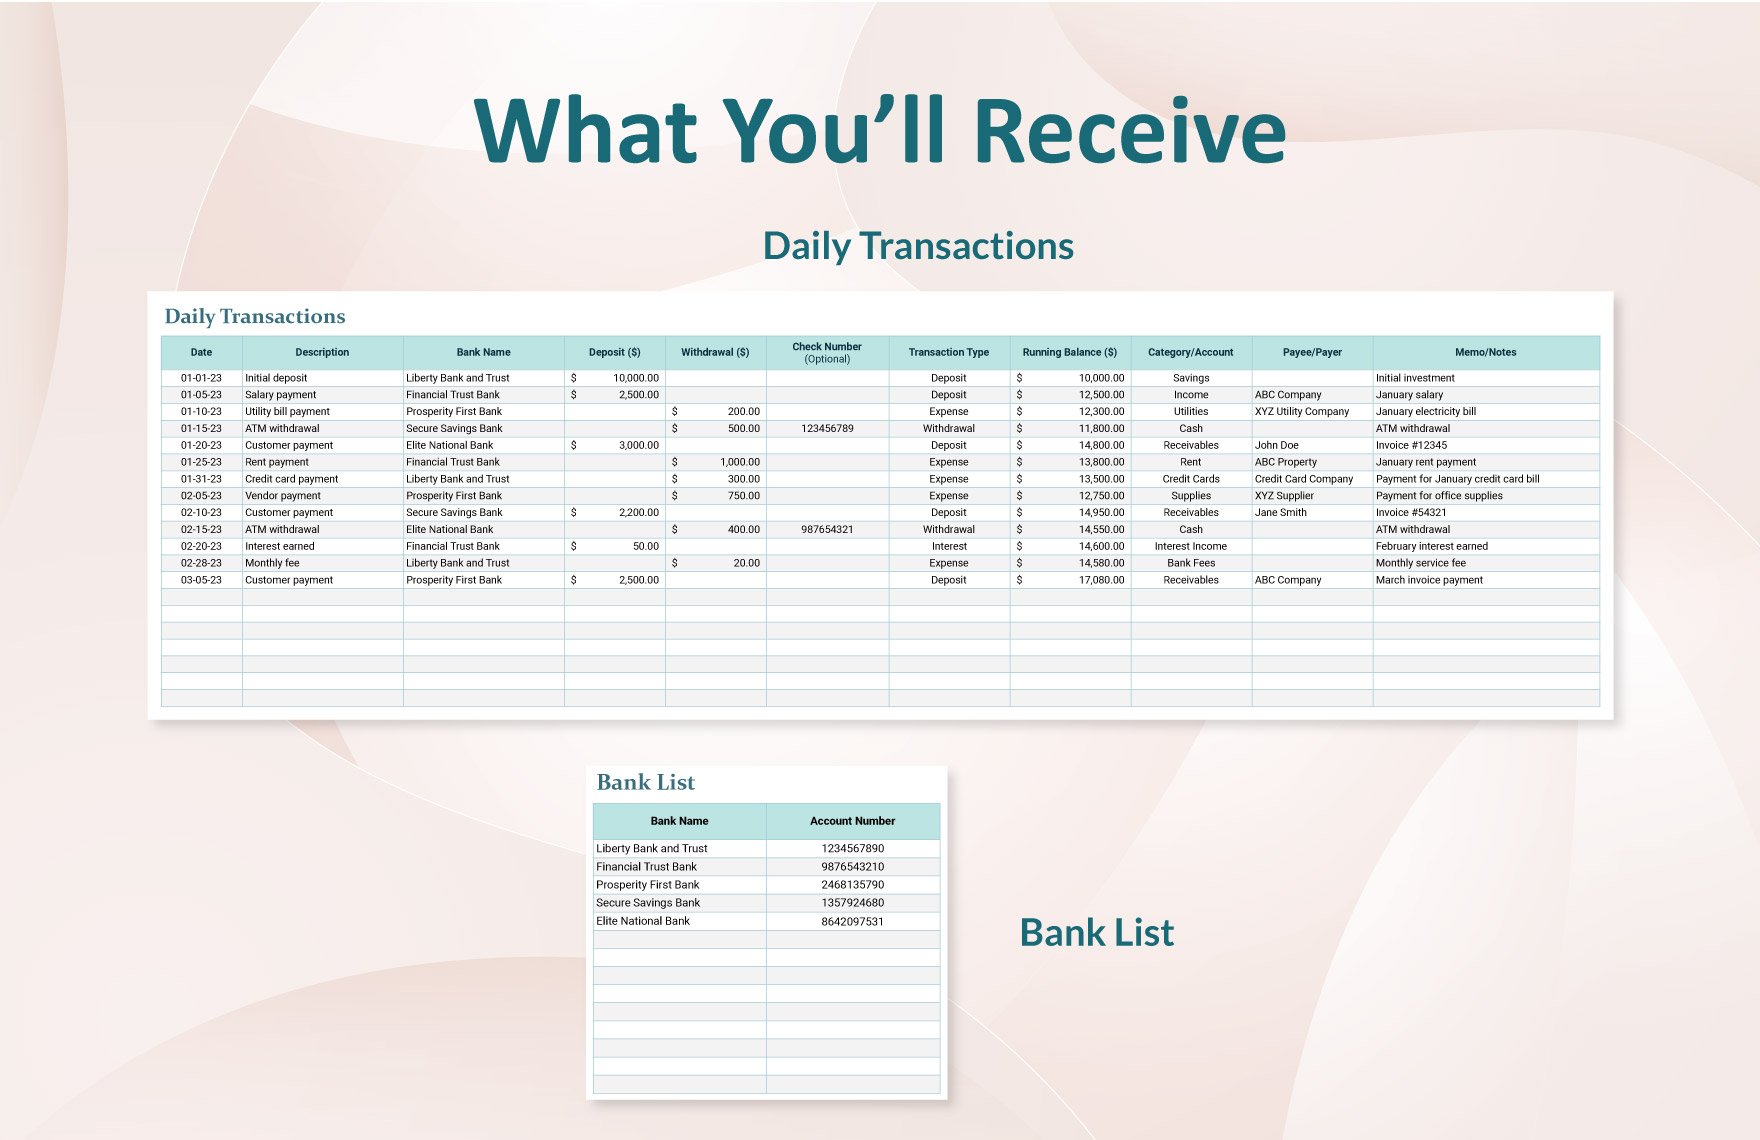 Bank Account Tracker Template